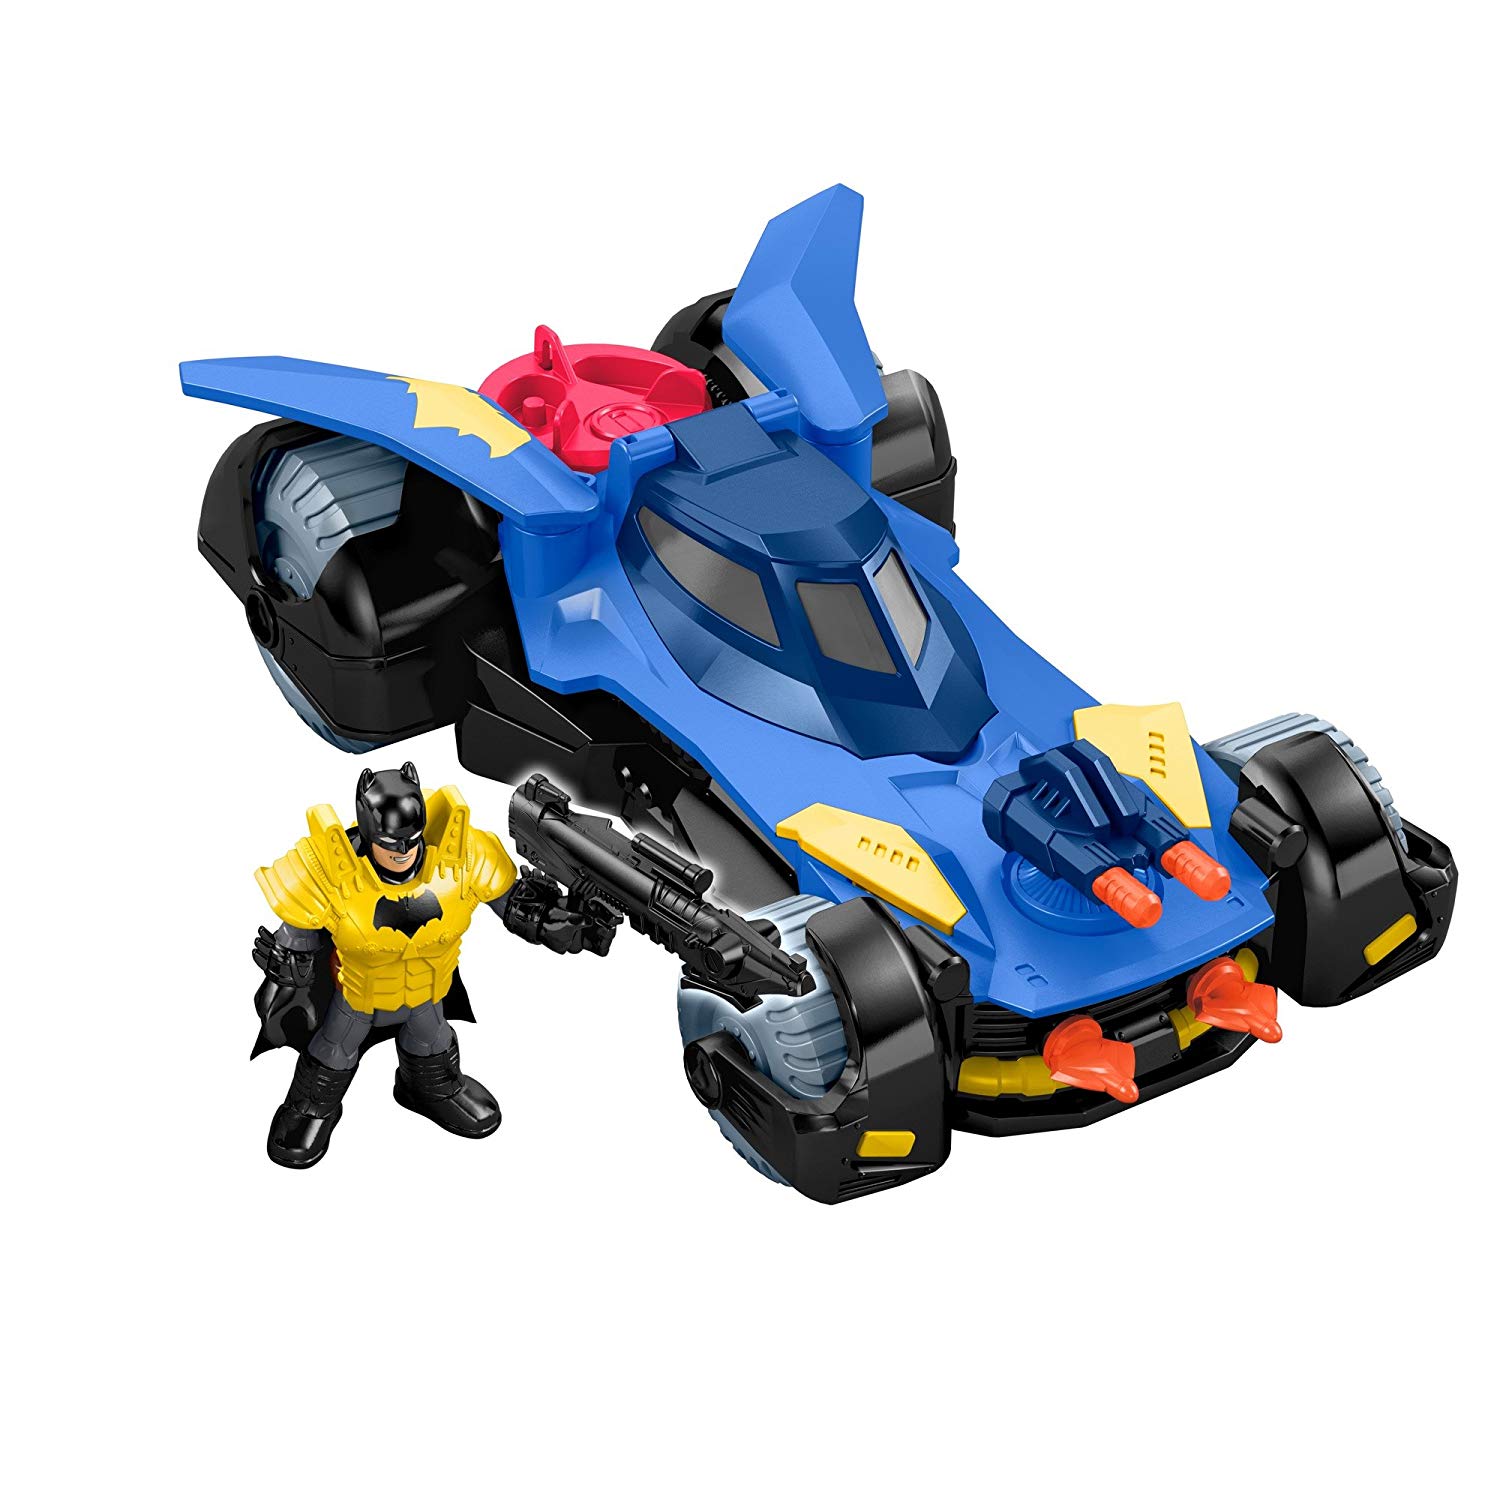 Fisher Price Imaginext Batmobile, Toy Dht64